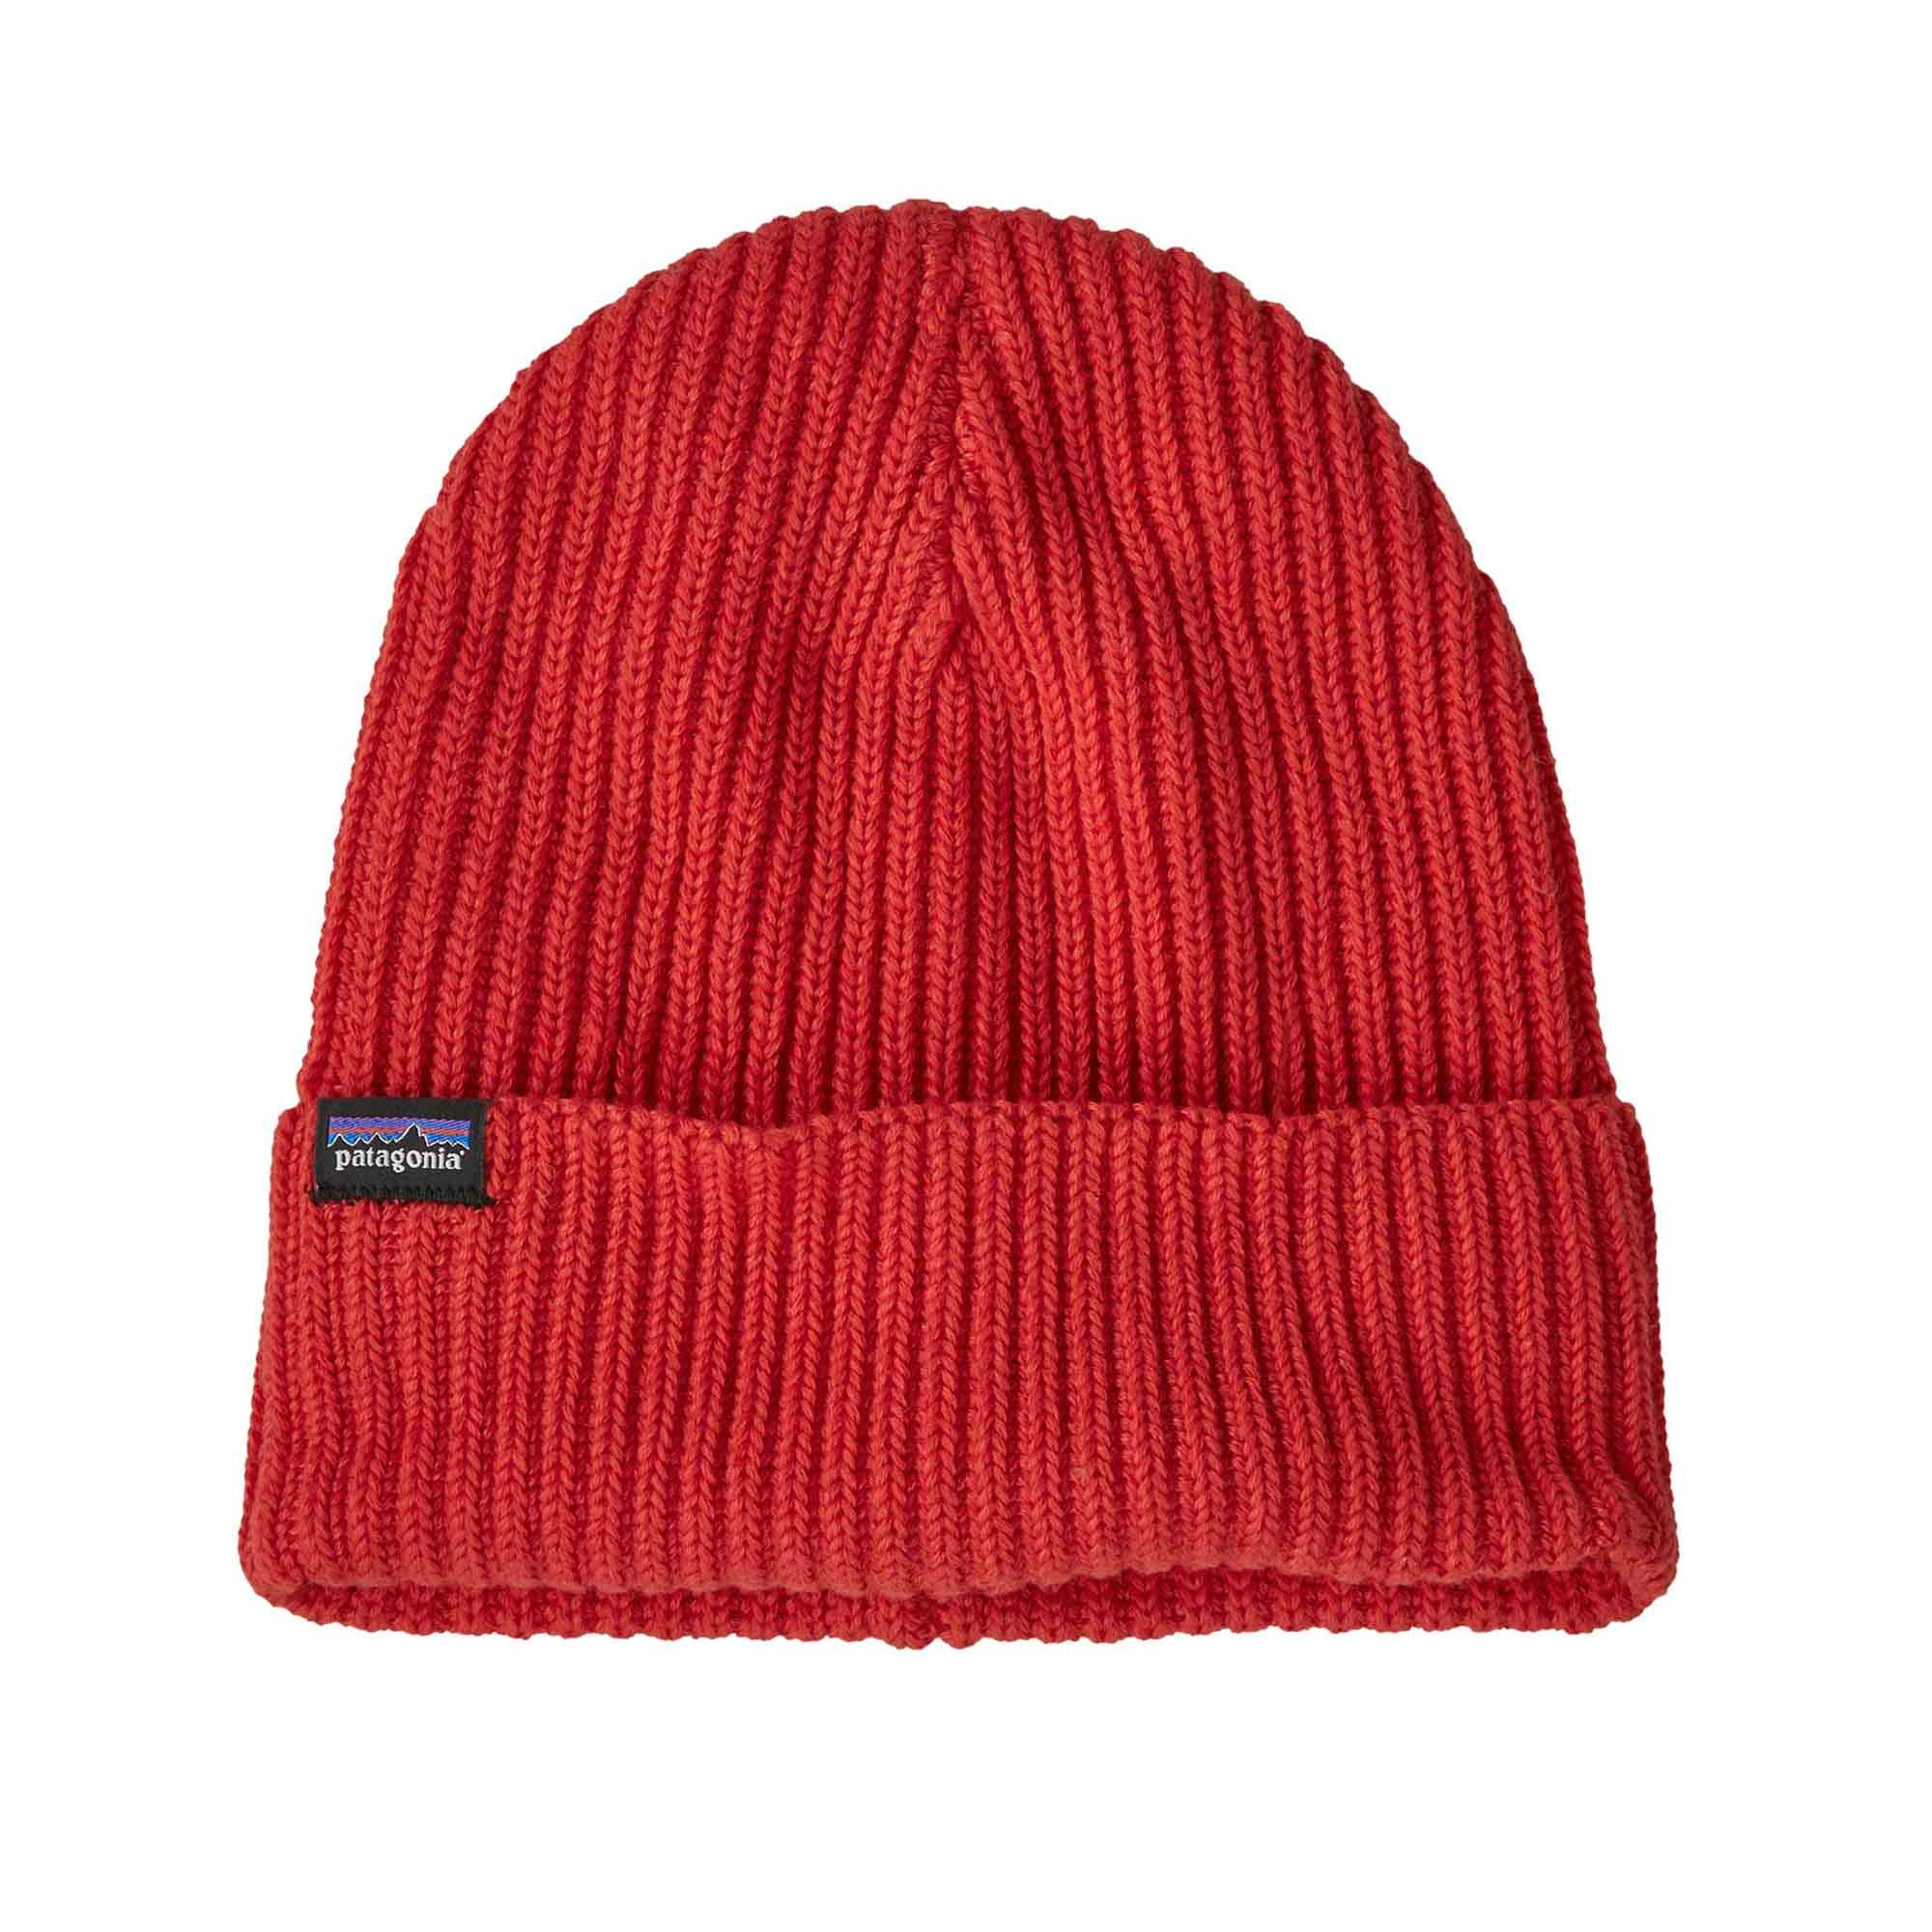 Patagonia Fisherman’s Rolled Beanie - Fin & Game